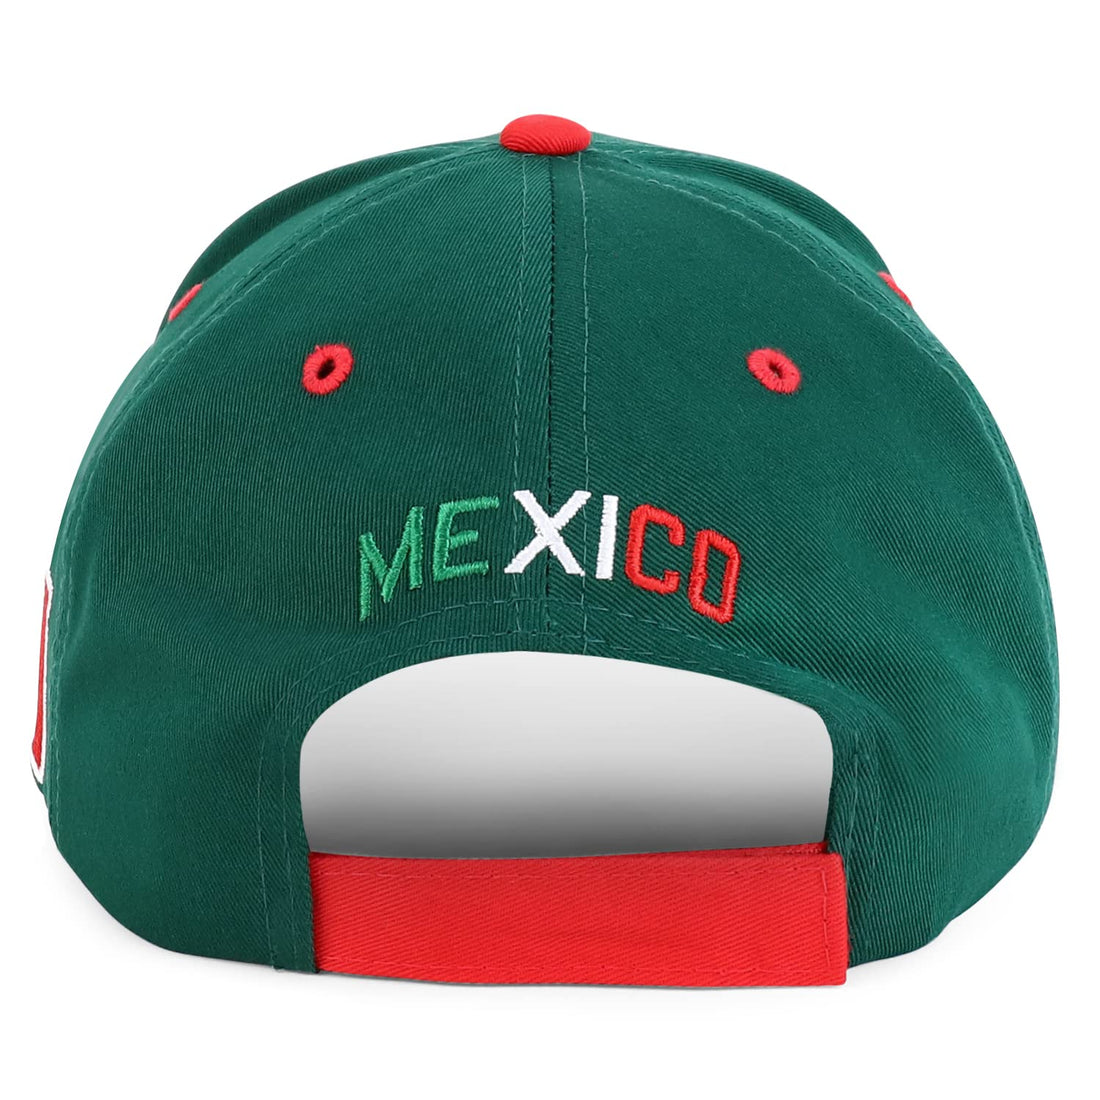 Trendy Apparel Shop XXL Hecho En Mexico Eagle 3D Embroidered Structured Baseball Cap